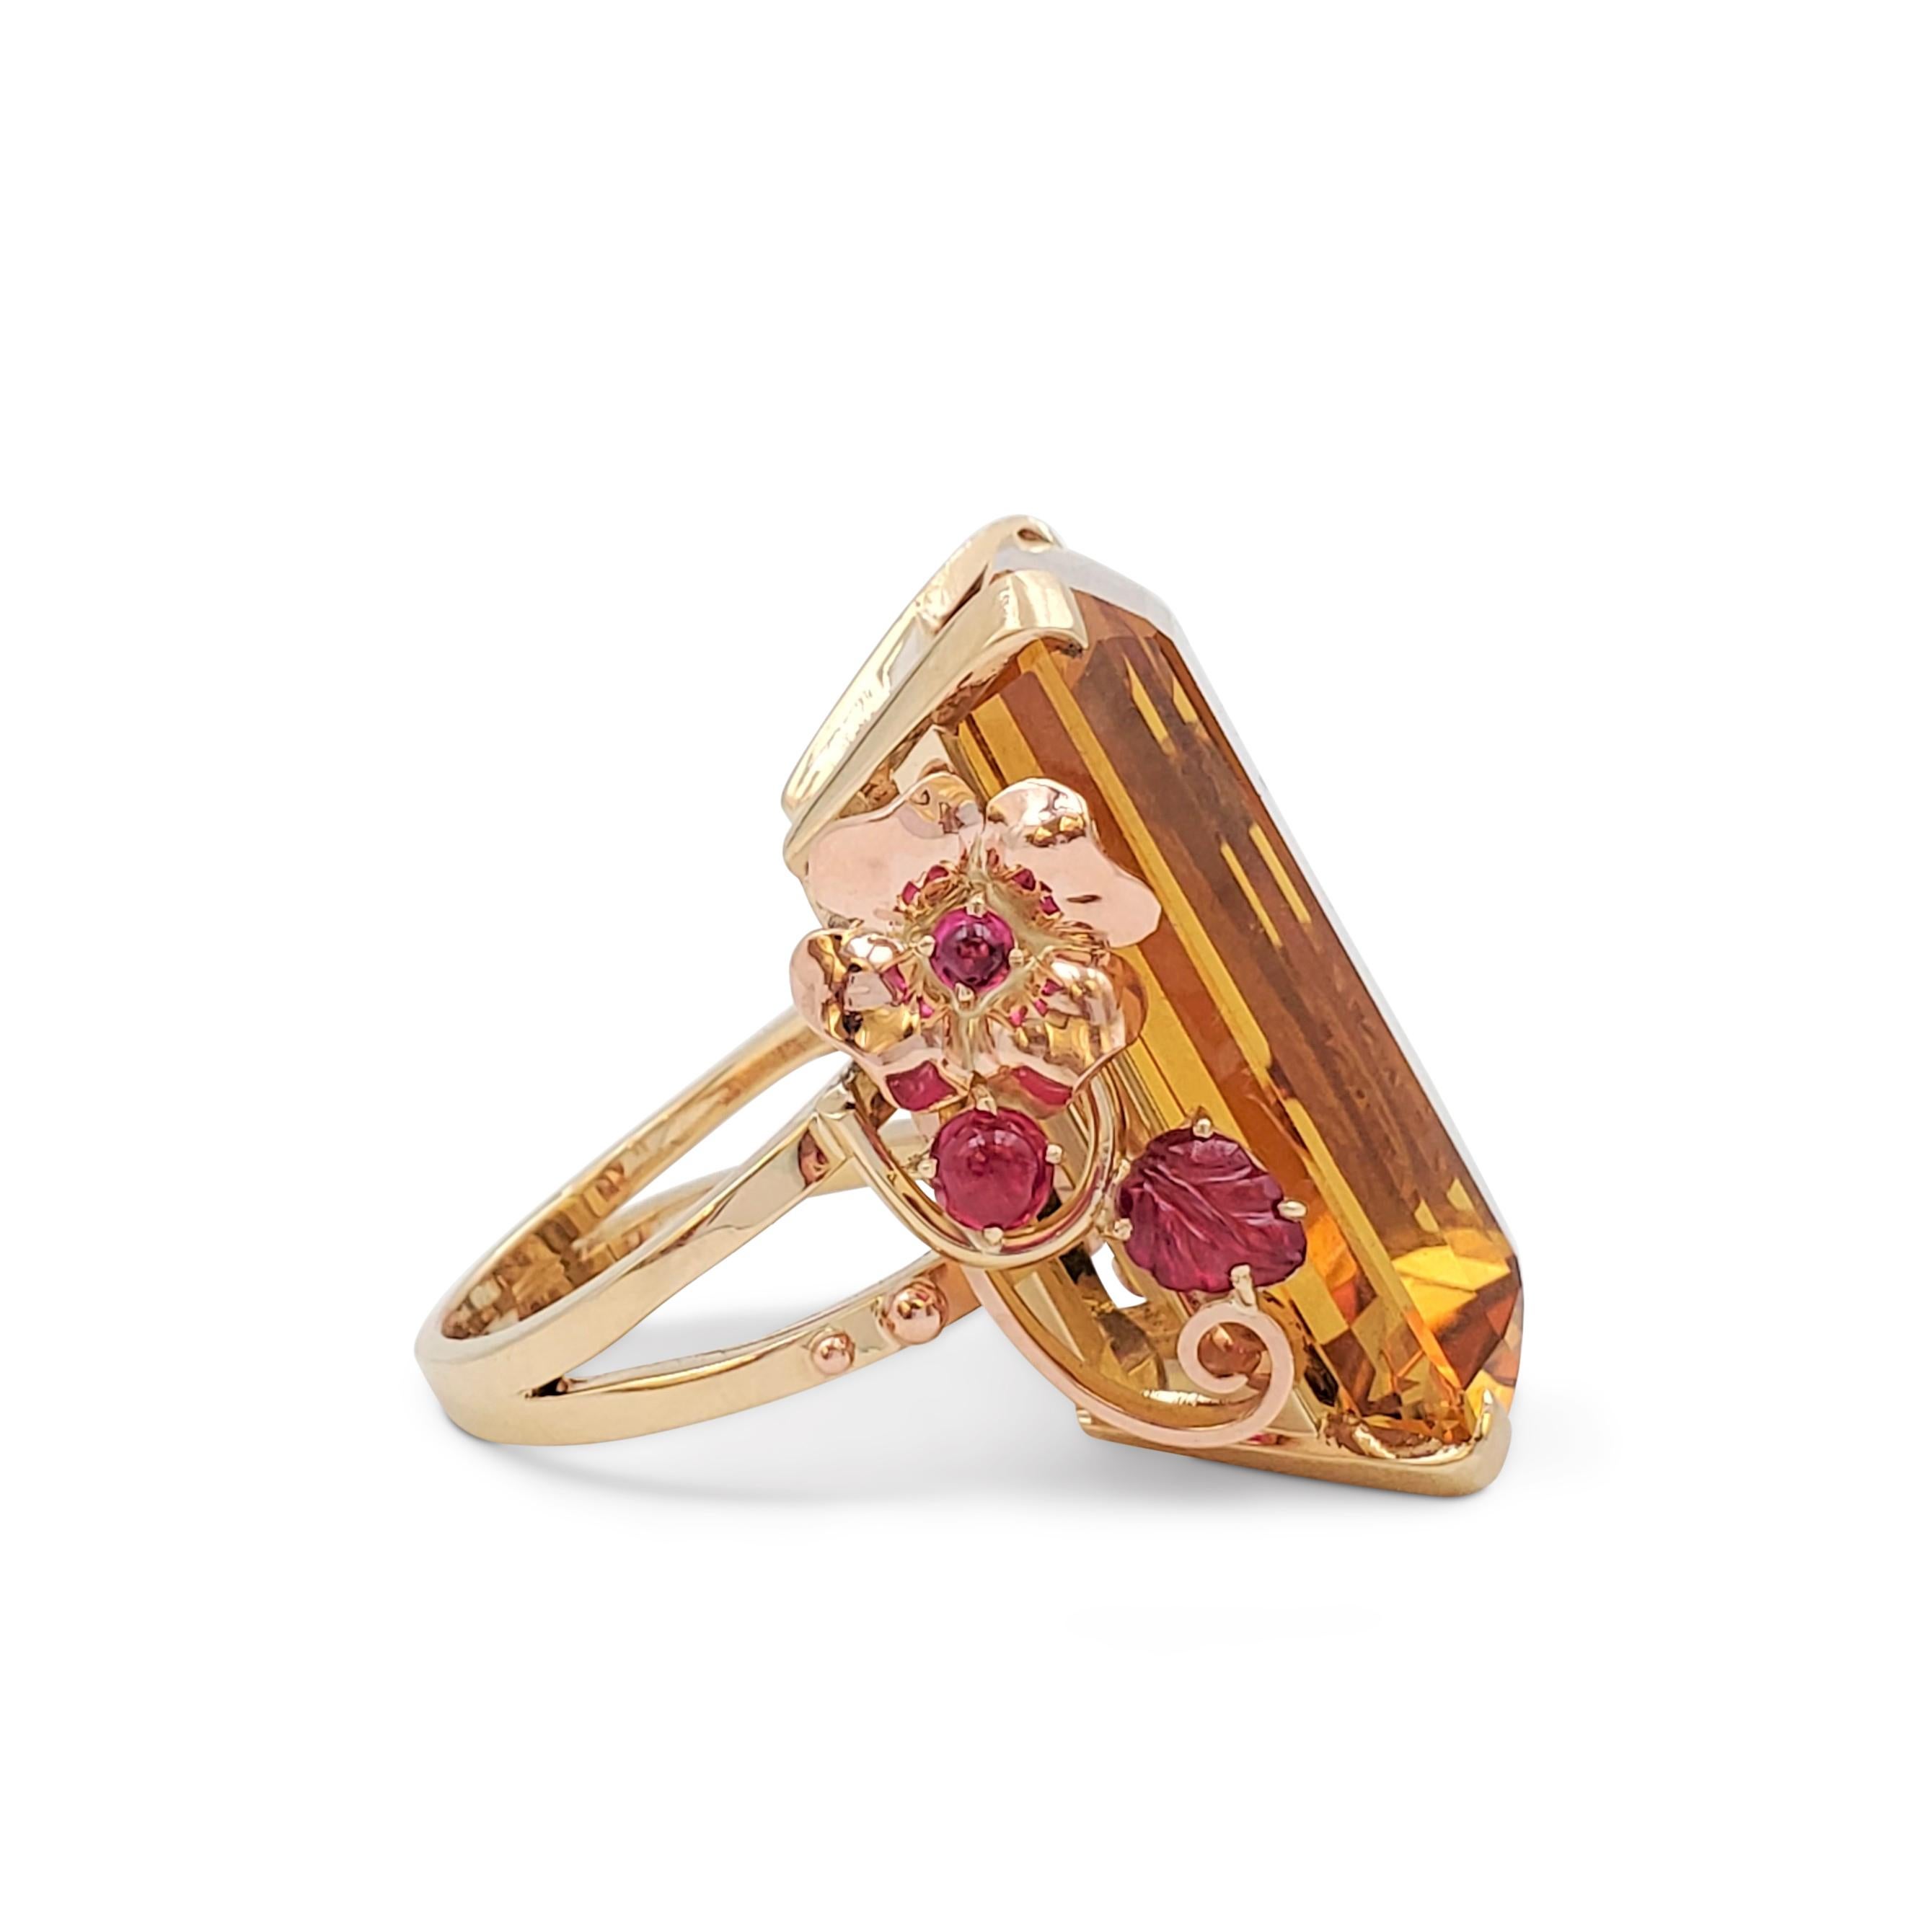 A statement-making retro cocktail ring crafted in 14 karat tri-colored gold centers a delicious honey-colored 57.86-carat rectangular-cut citrine stone. Each side of the ring mounting features design elements typical of the time period.  The